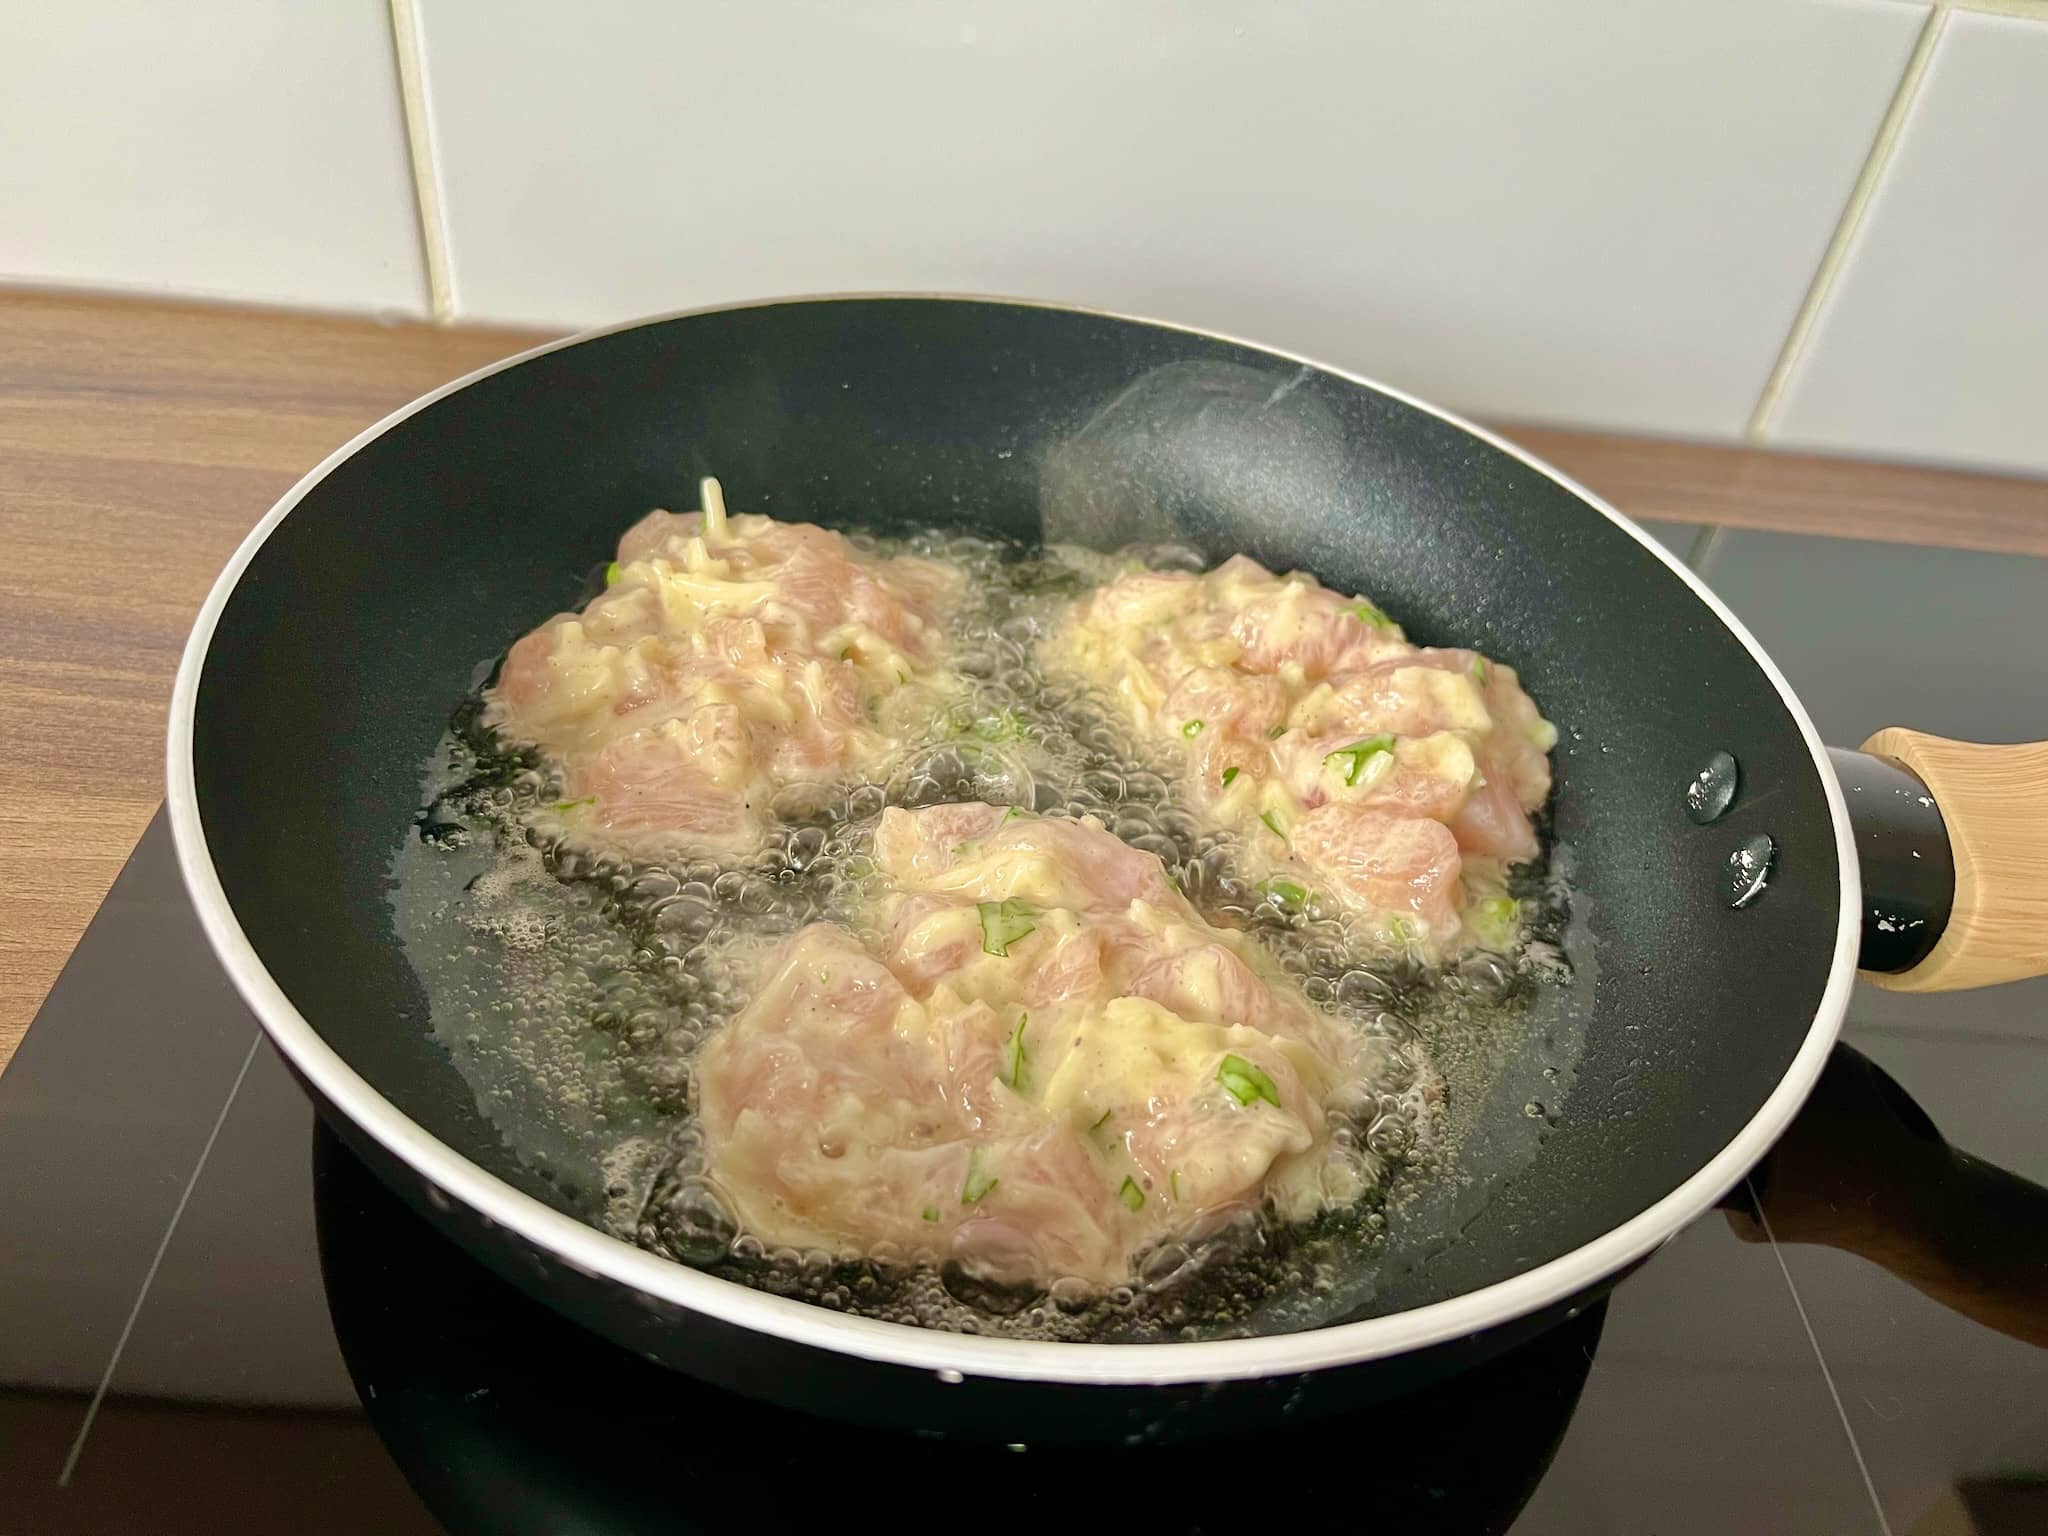 Chicken bites frying in a pan